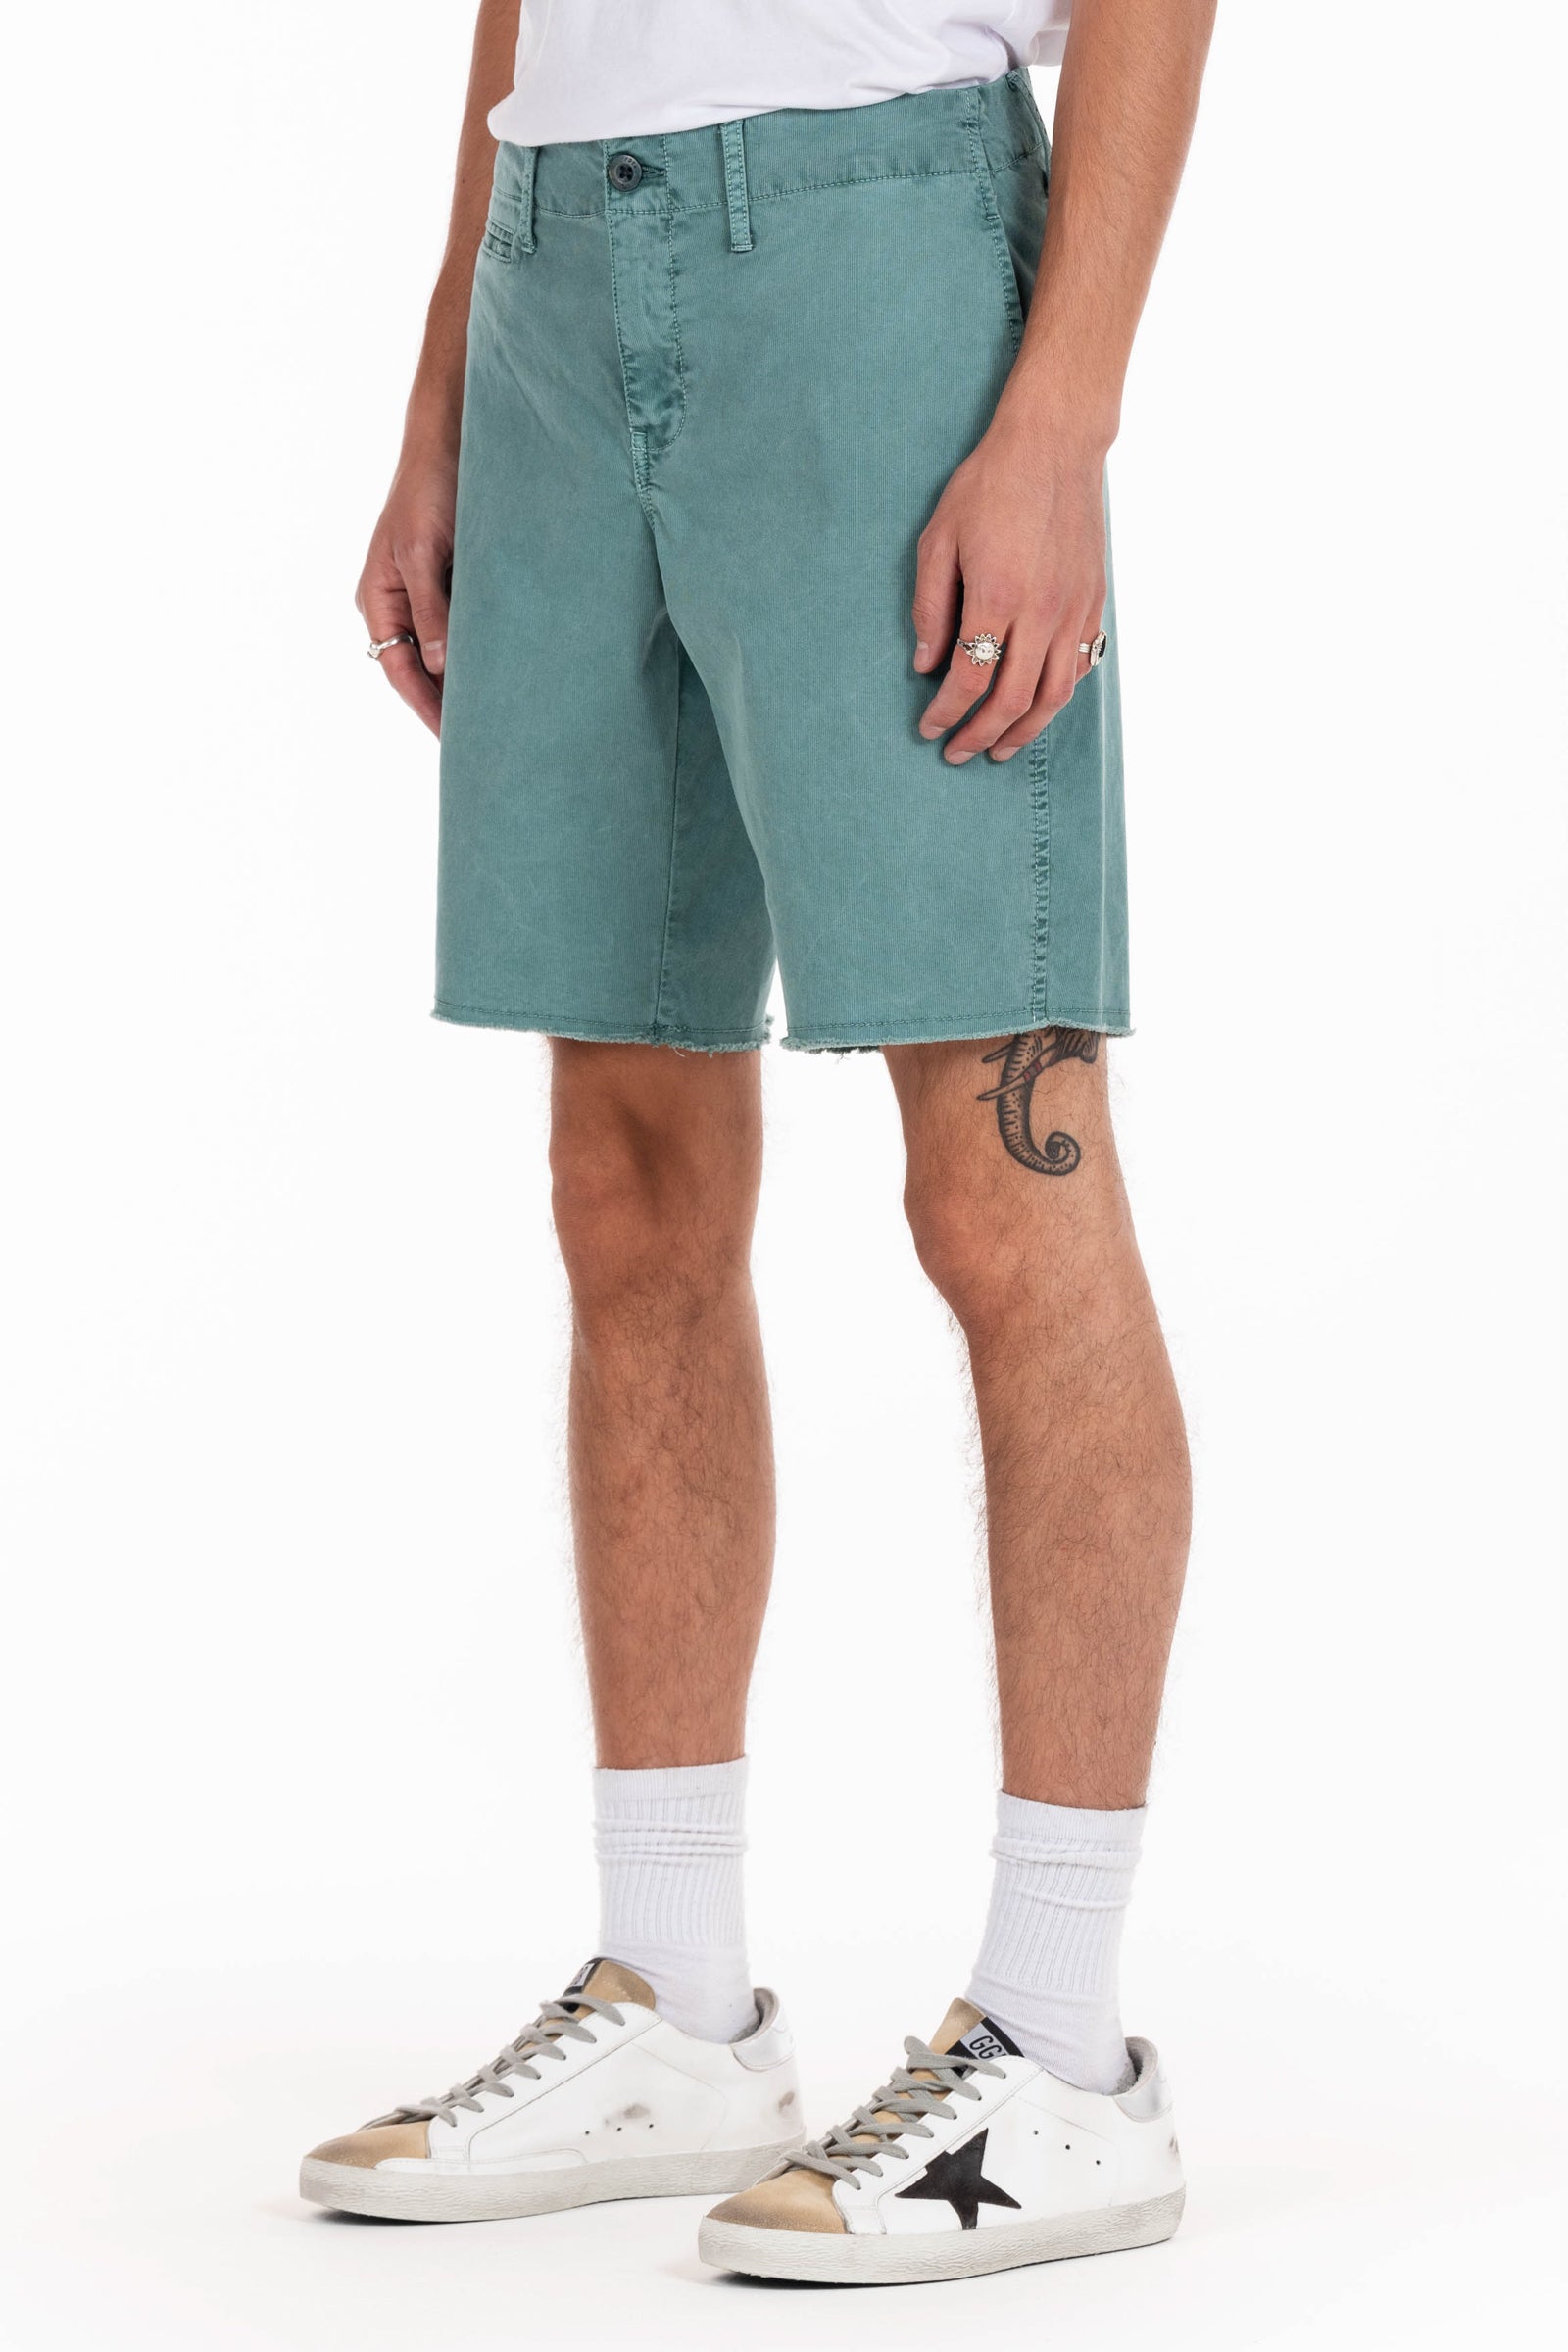 Original Paperbacks Rockland Chino Short in Breakwater on Model Cropped Side View